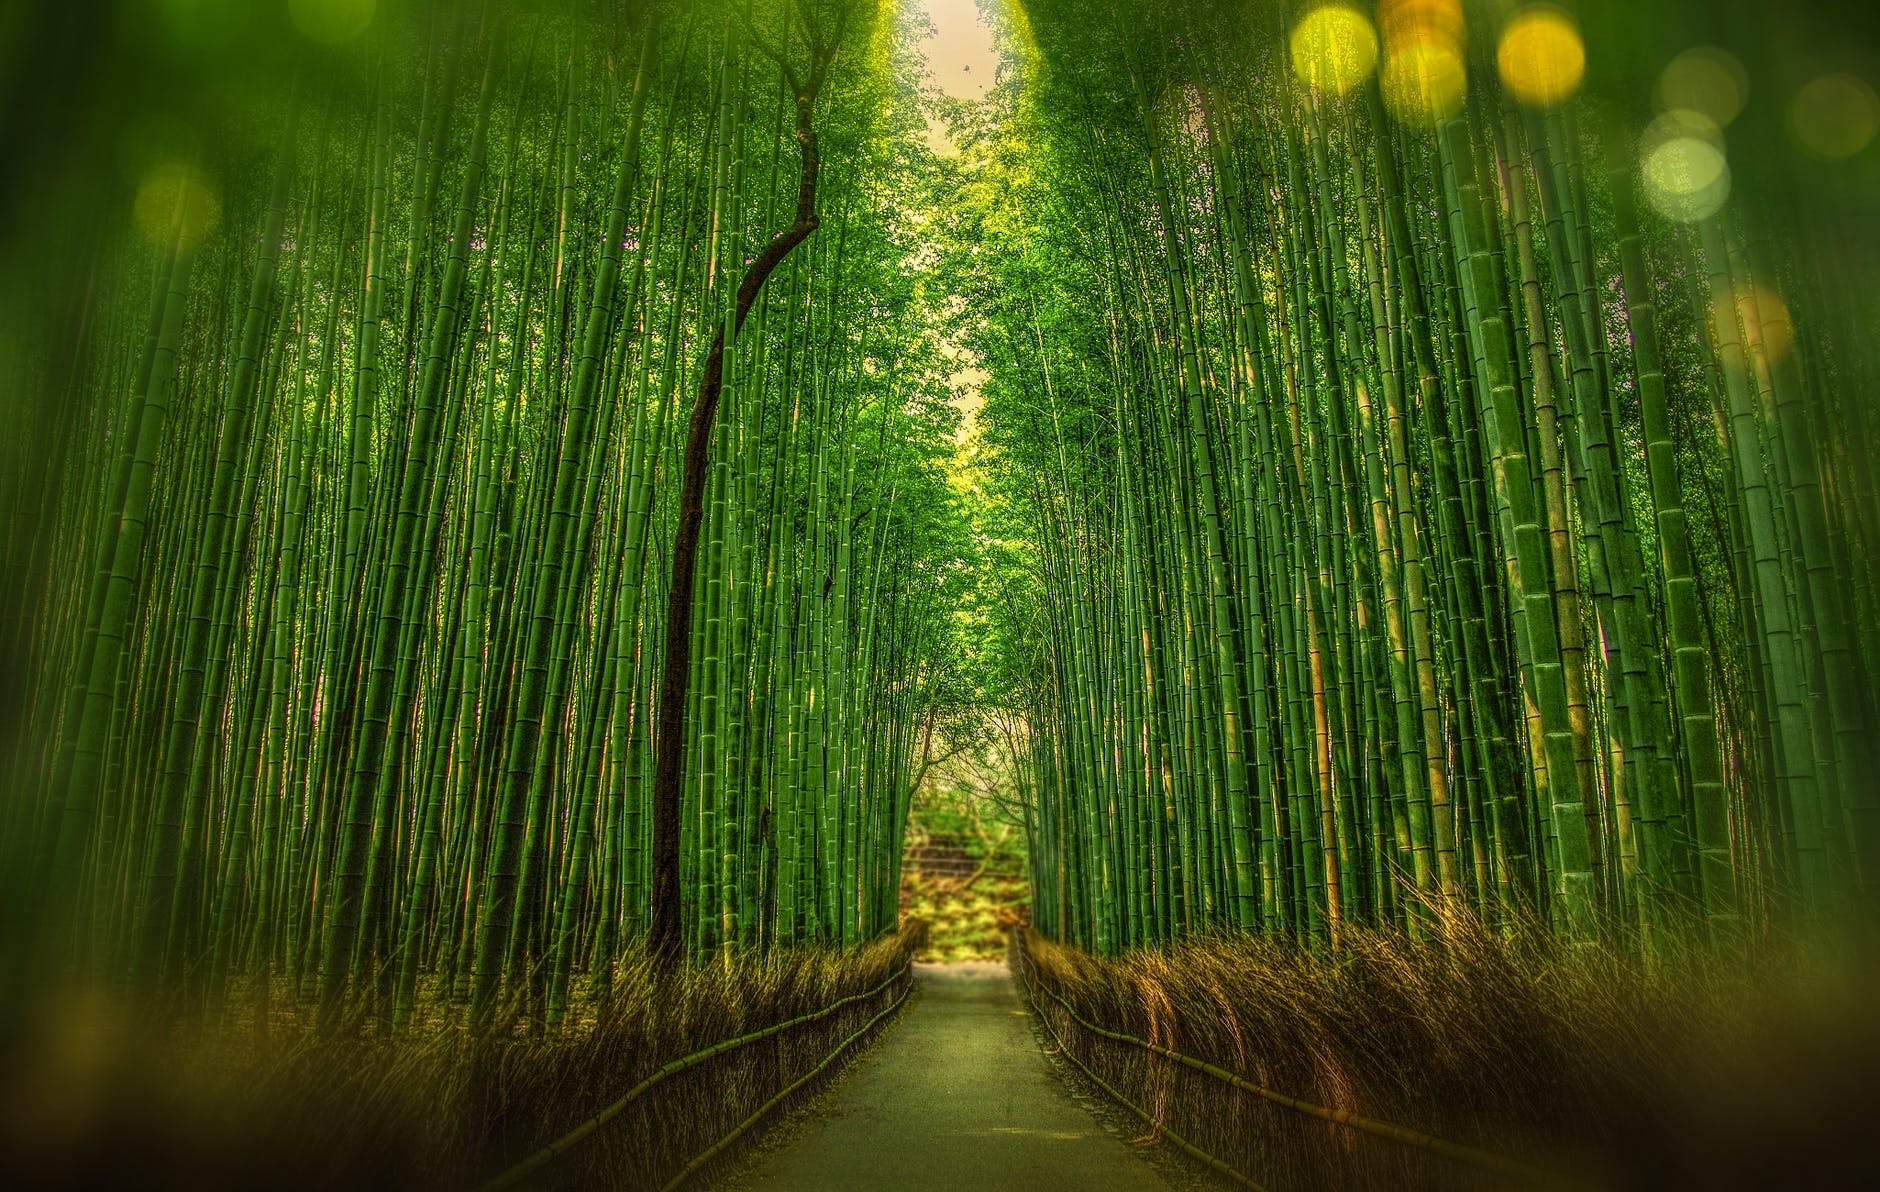 scenic view of bamboo trees